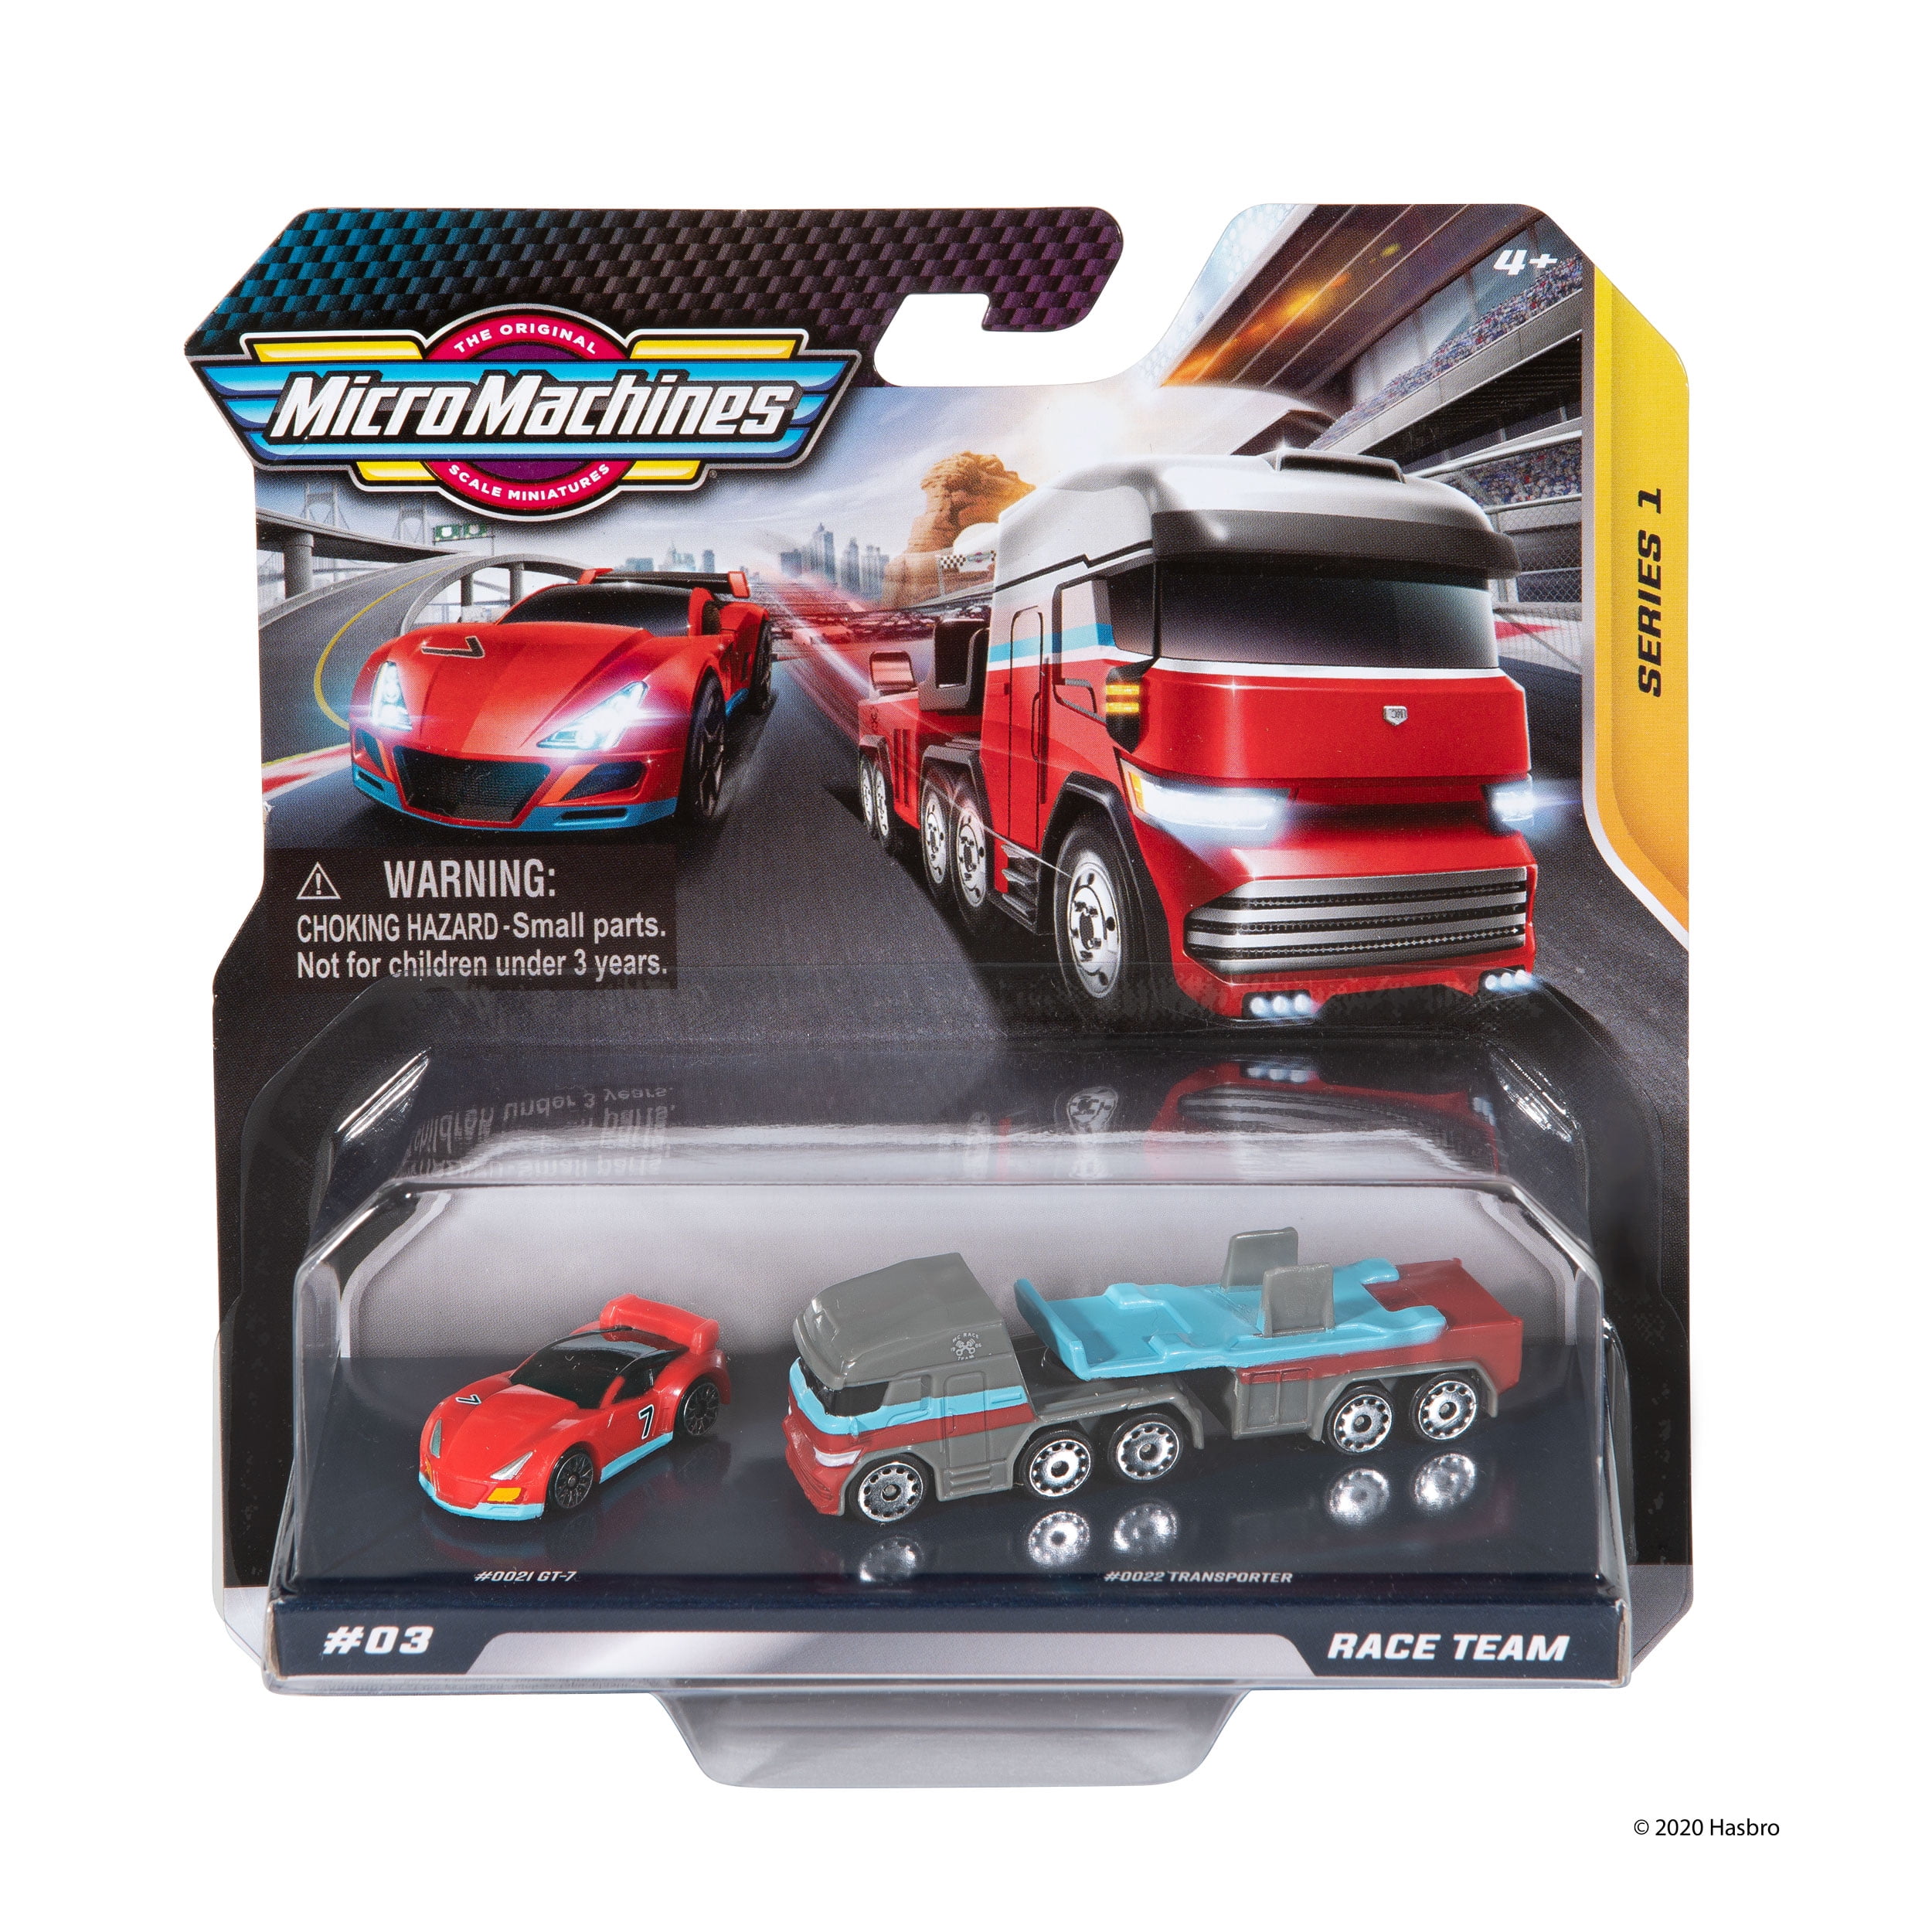 MICROMACHINES Multipack Starter Packs Race Team - Each Pack Features Highly  Detailed MICROMACHINES Vehicles